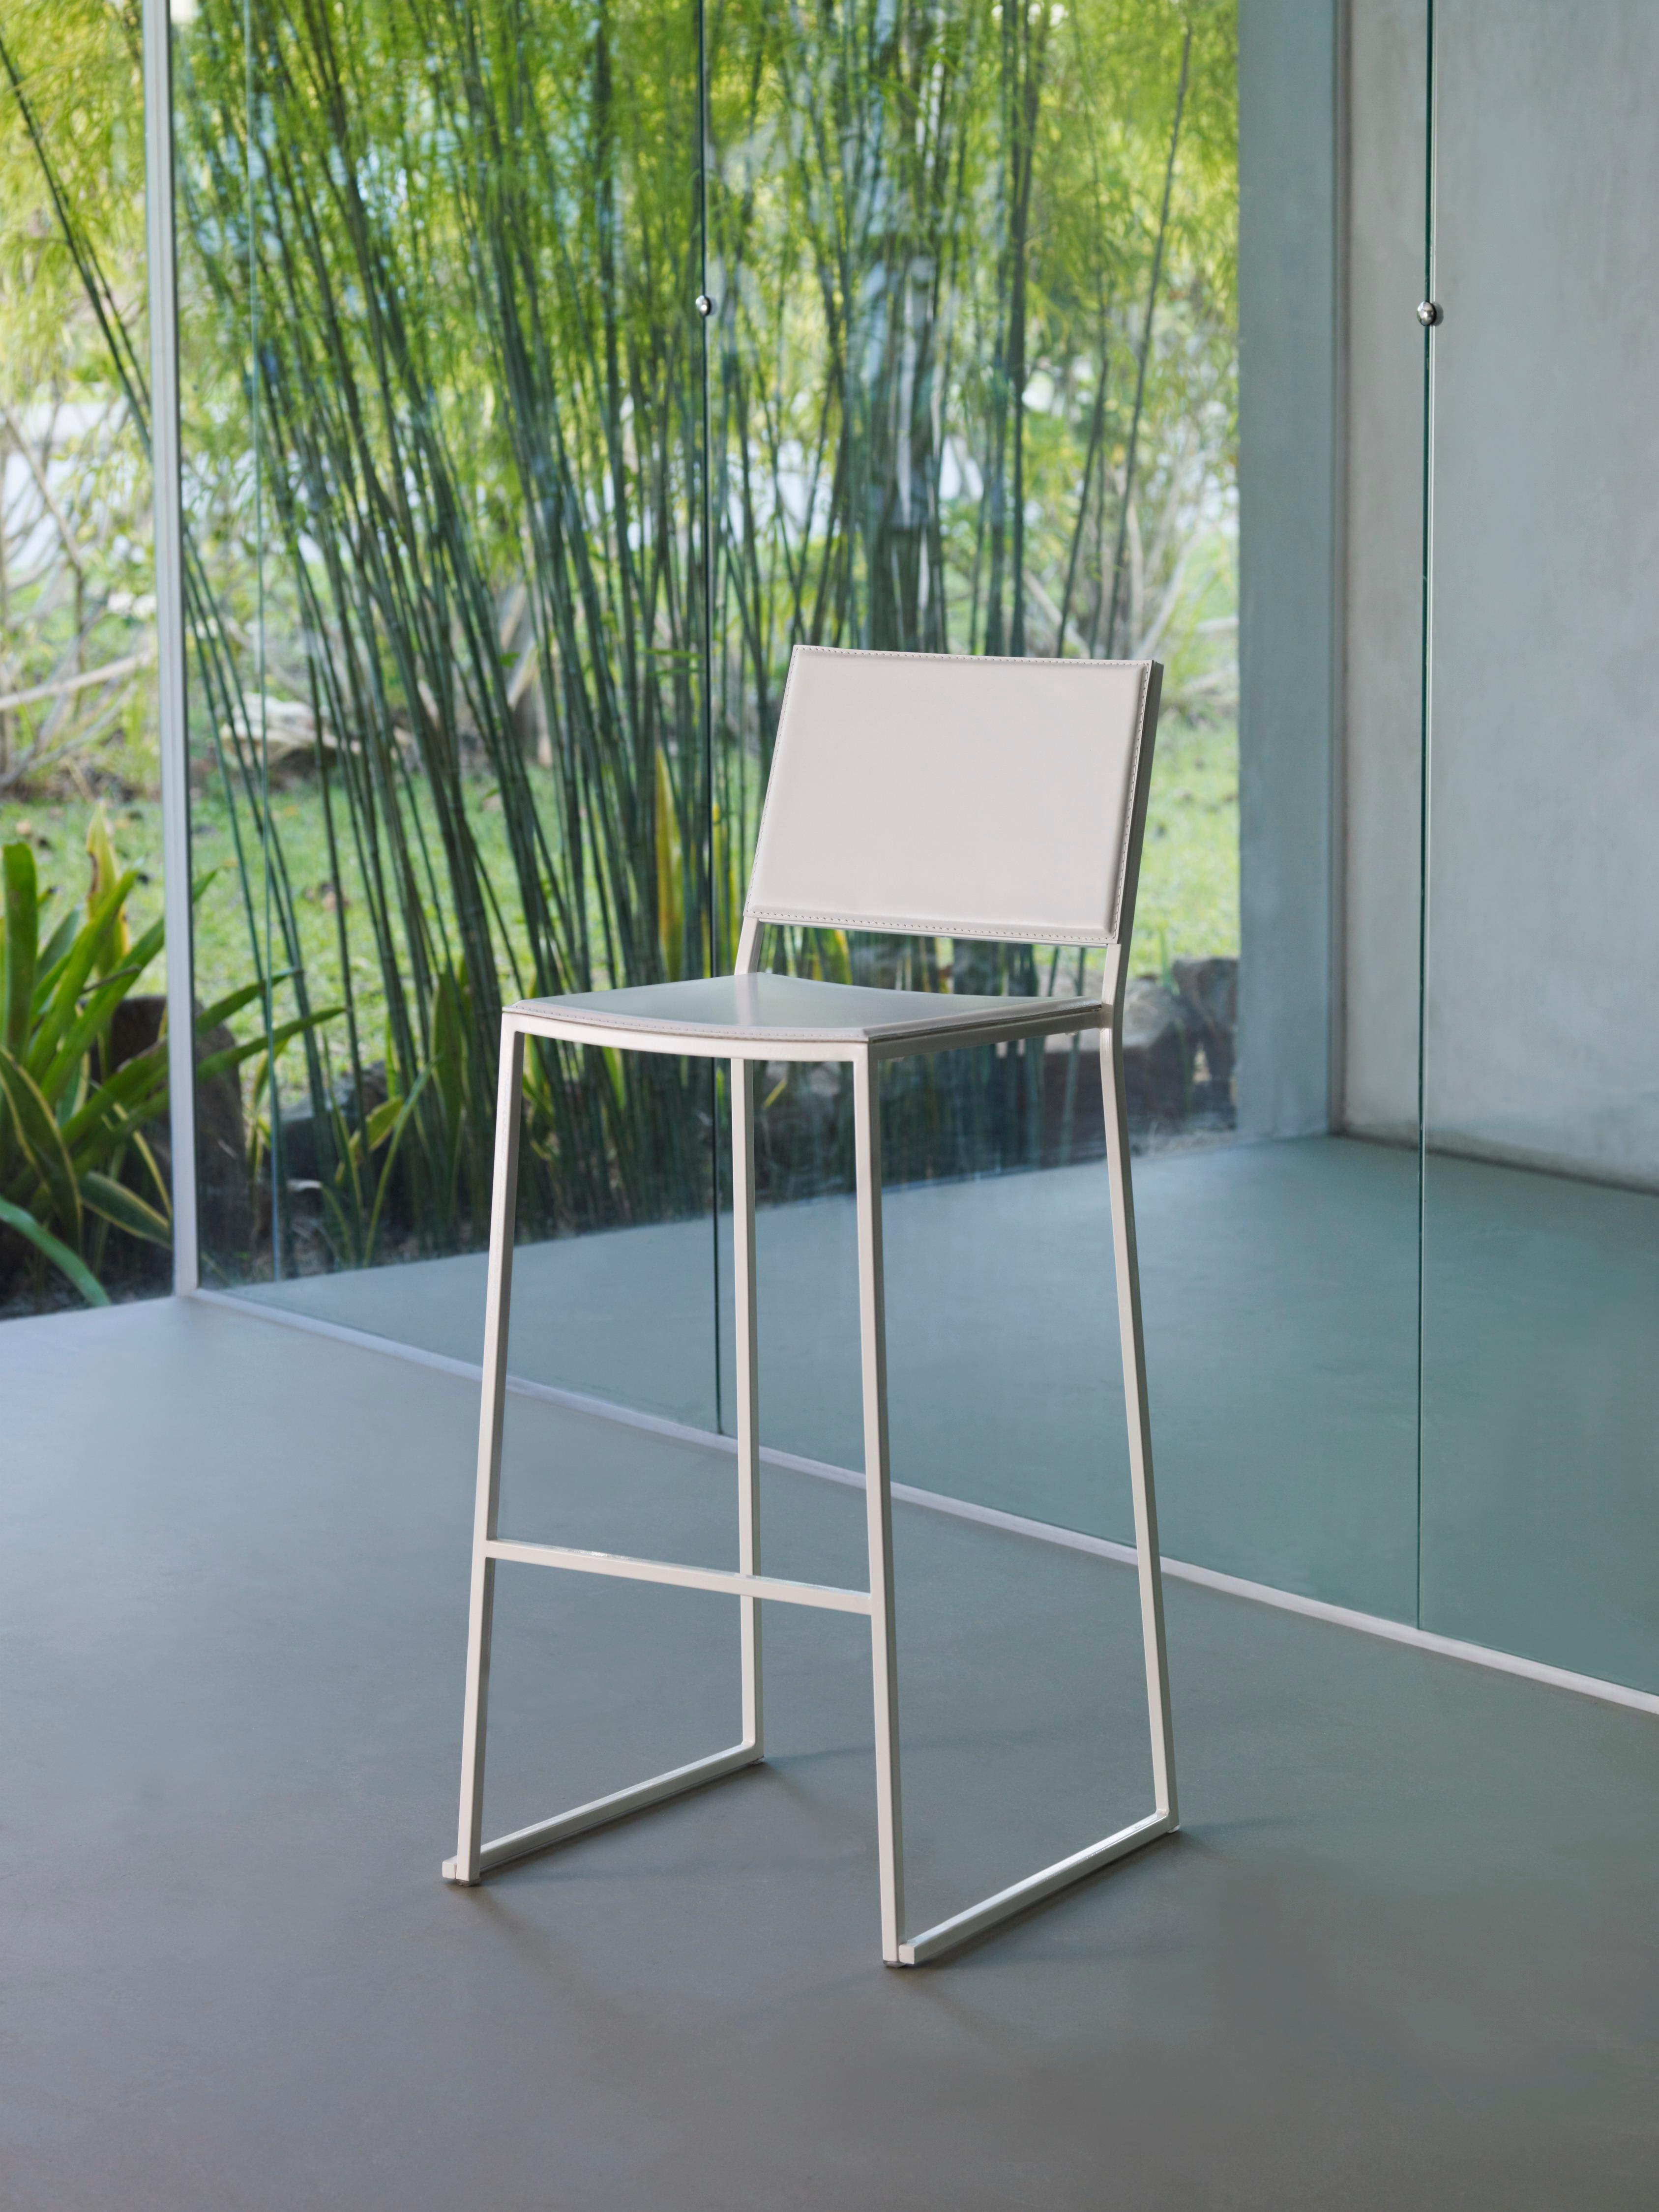 High Básica Bar Stool by Doimo Brasil
Dimensions: W 46 x D 50 x H 104 cm 
Materials: Satinado, Lacquer.


With the intention of providing good taste and personality, Doimo deciphers trends and follows the evolution of man and his space. To this end,